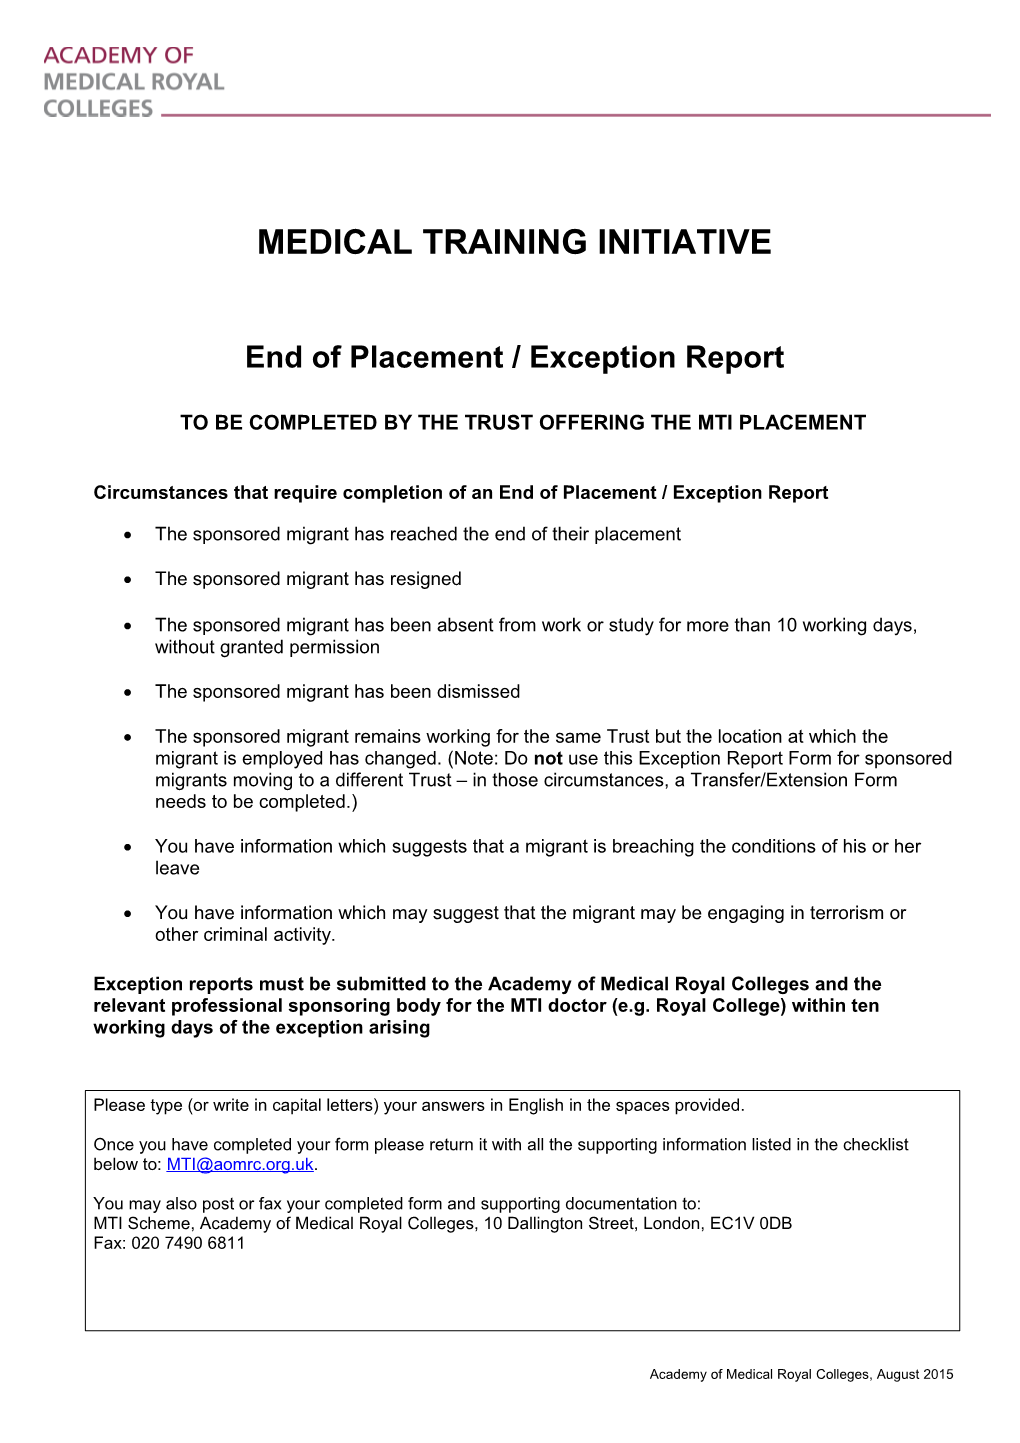 To Be Completed by the Trust Offering the Mti Placement